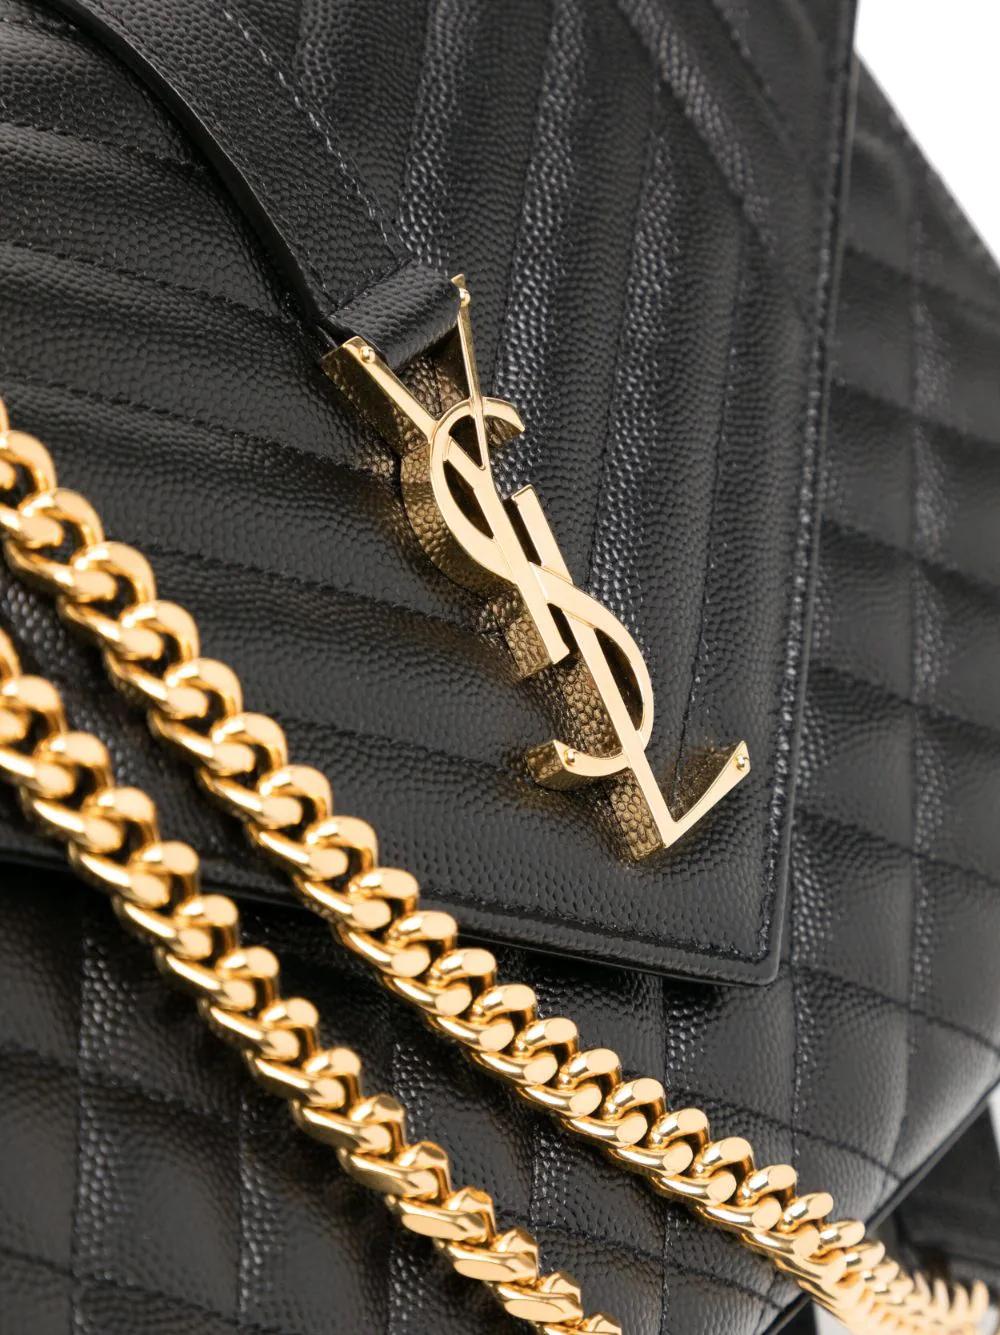 Expertly crafted YSL shoulder bag made of calf leather with diamond quilting and chevron stitching. Featuring a fold-over top with signature YSL logo plaque and chain-link shoulder strap. Gold-tone hardware. The condition of this bag is excellent.